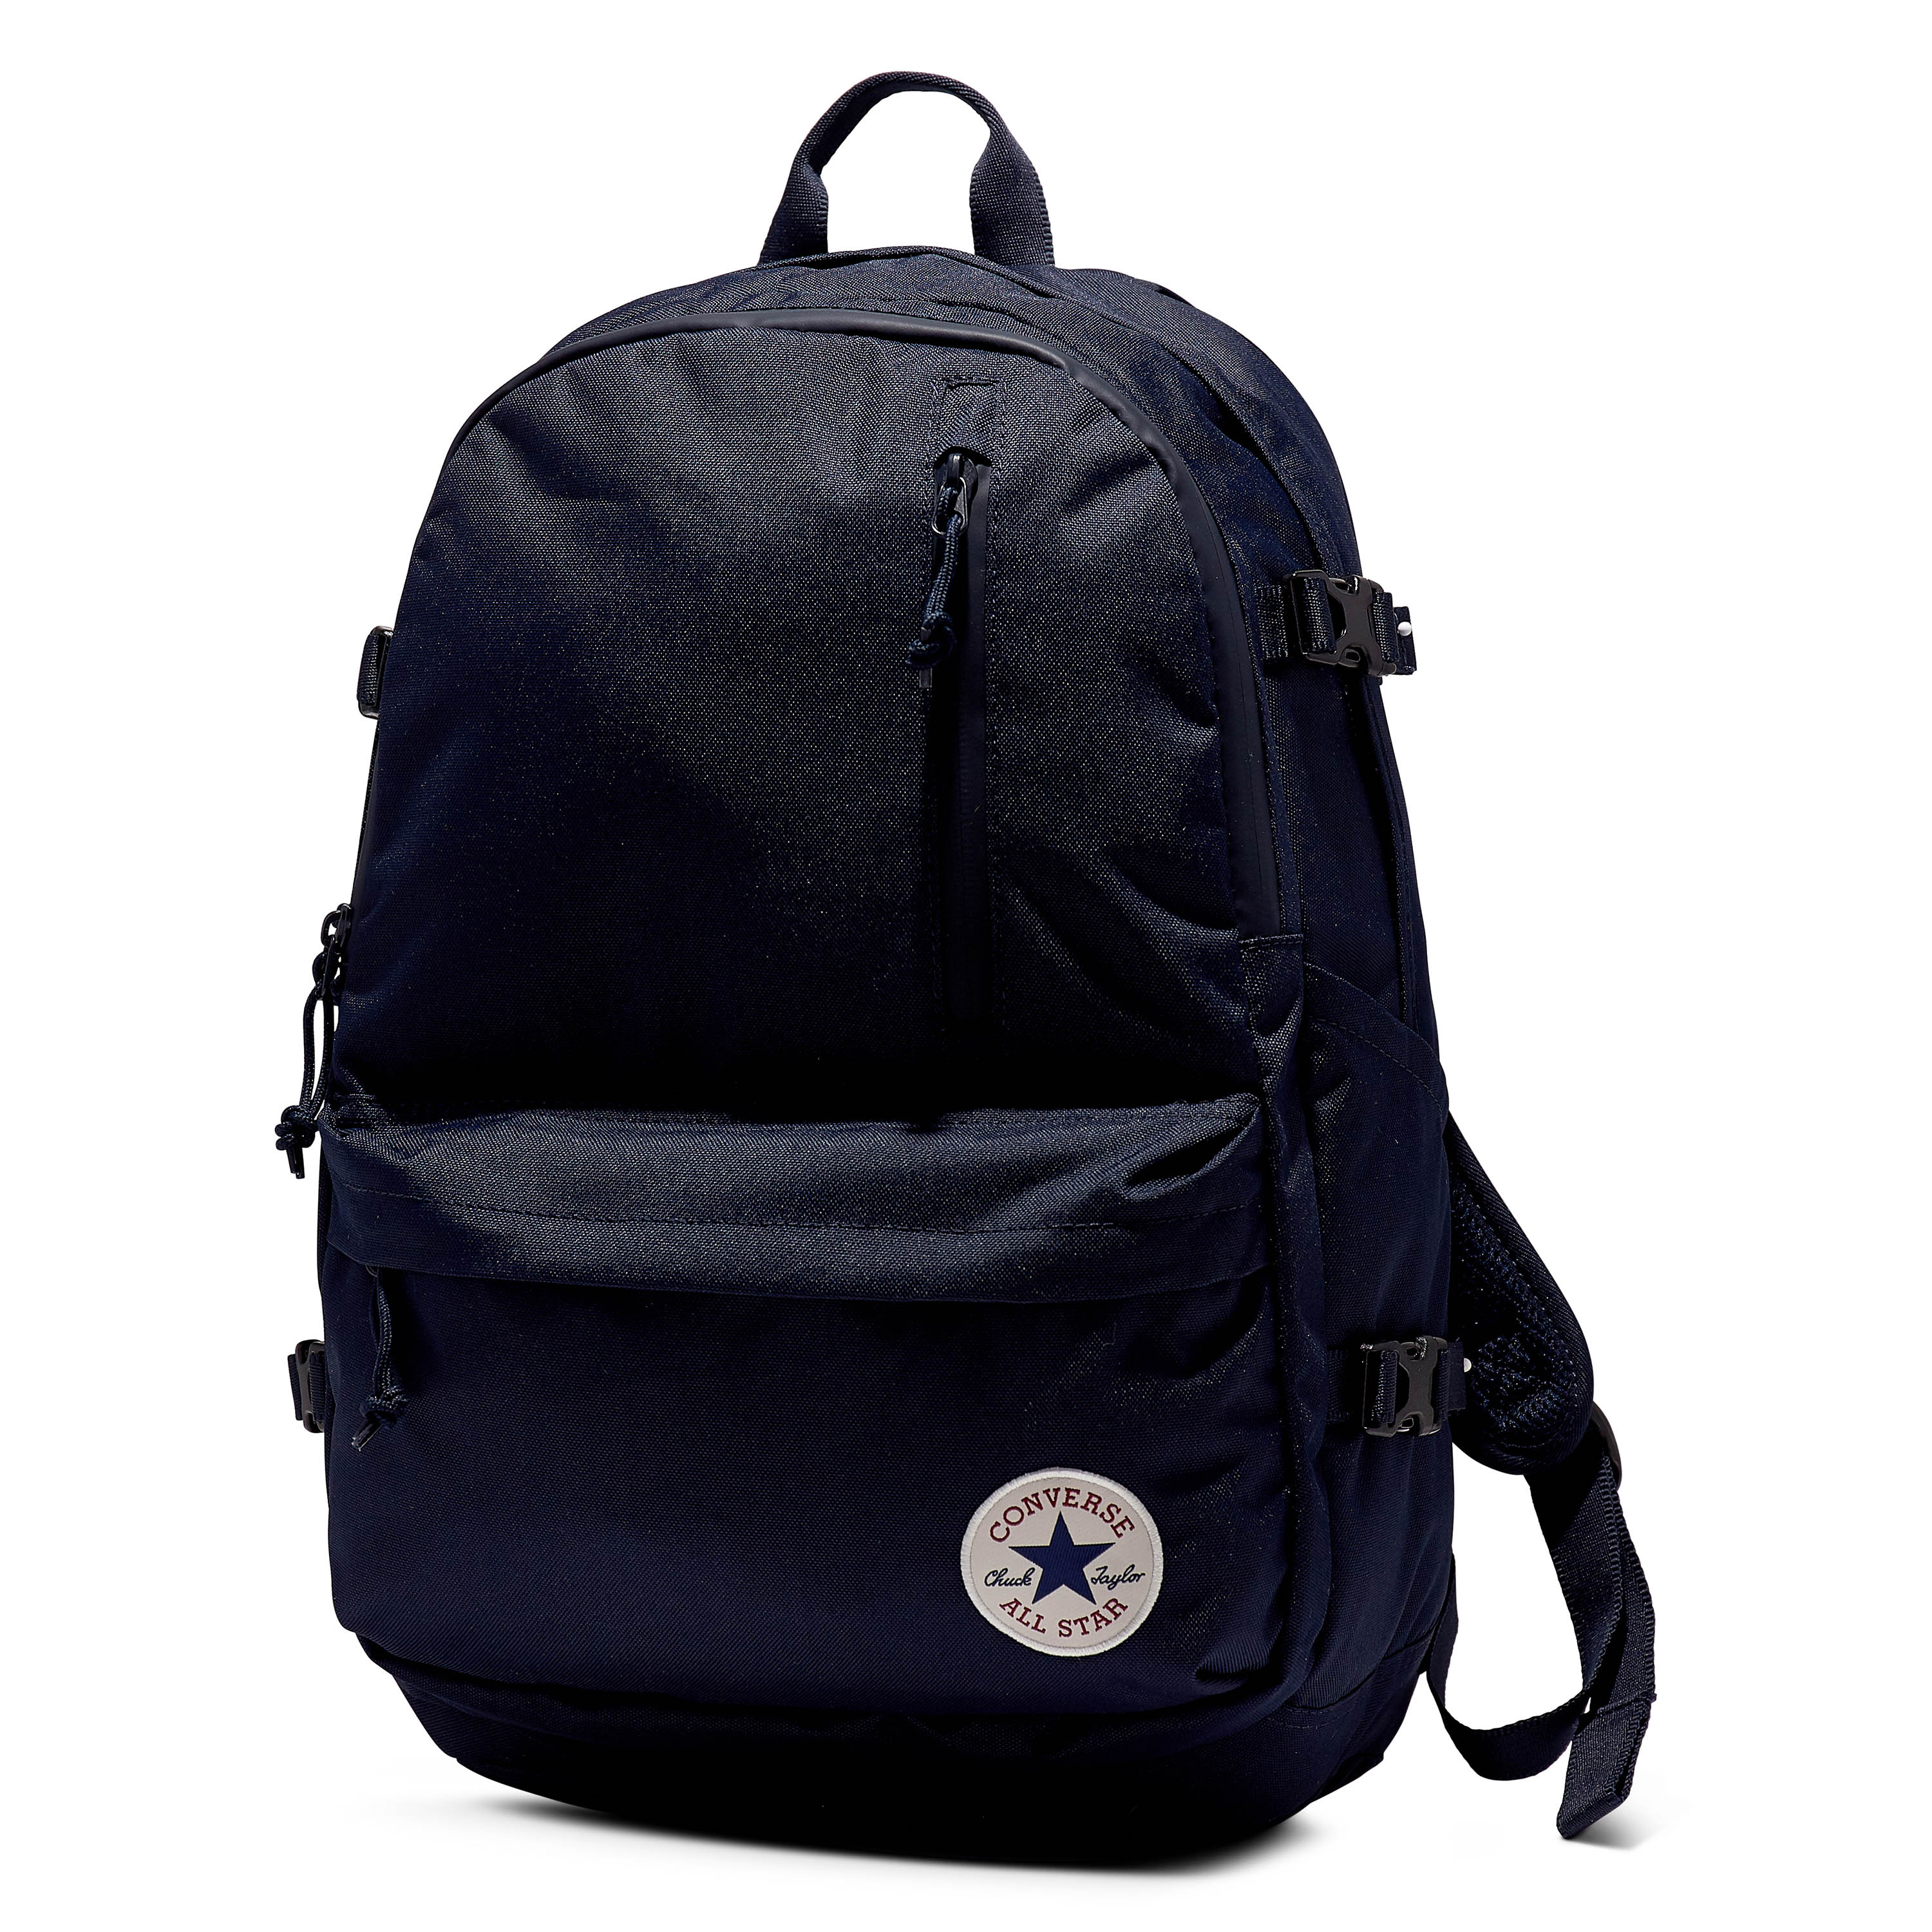 converse backpack price philippines